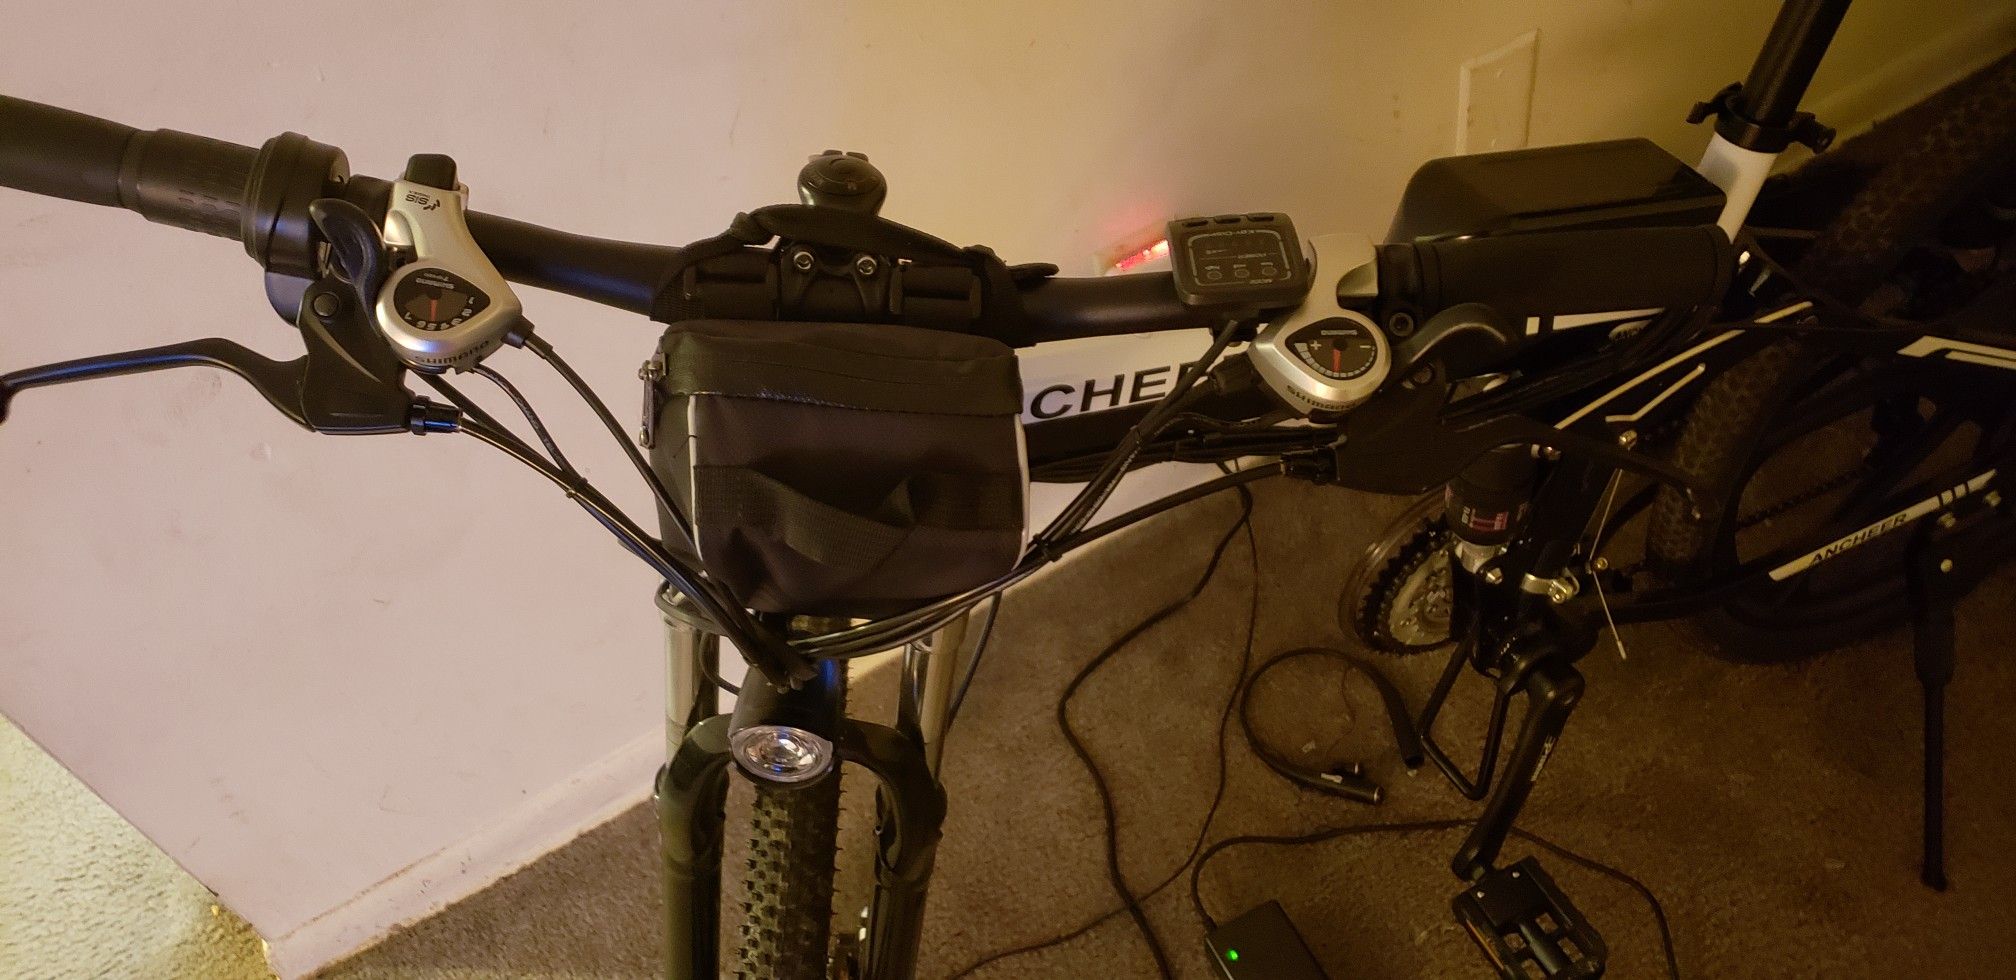 Ancheer Electric and Folding Bike.